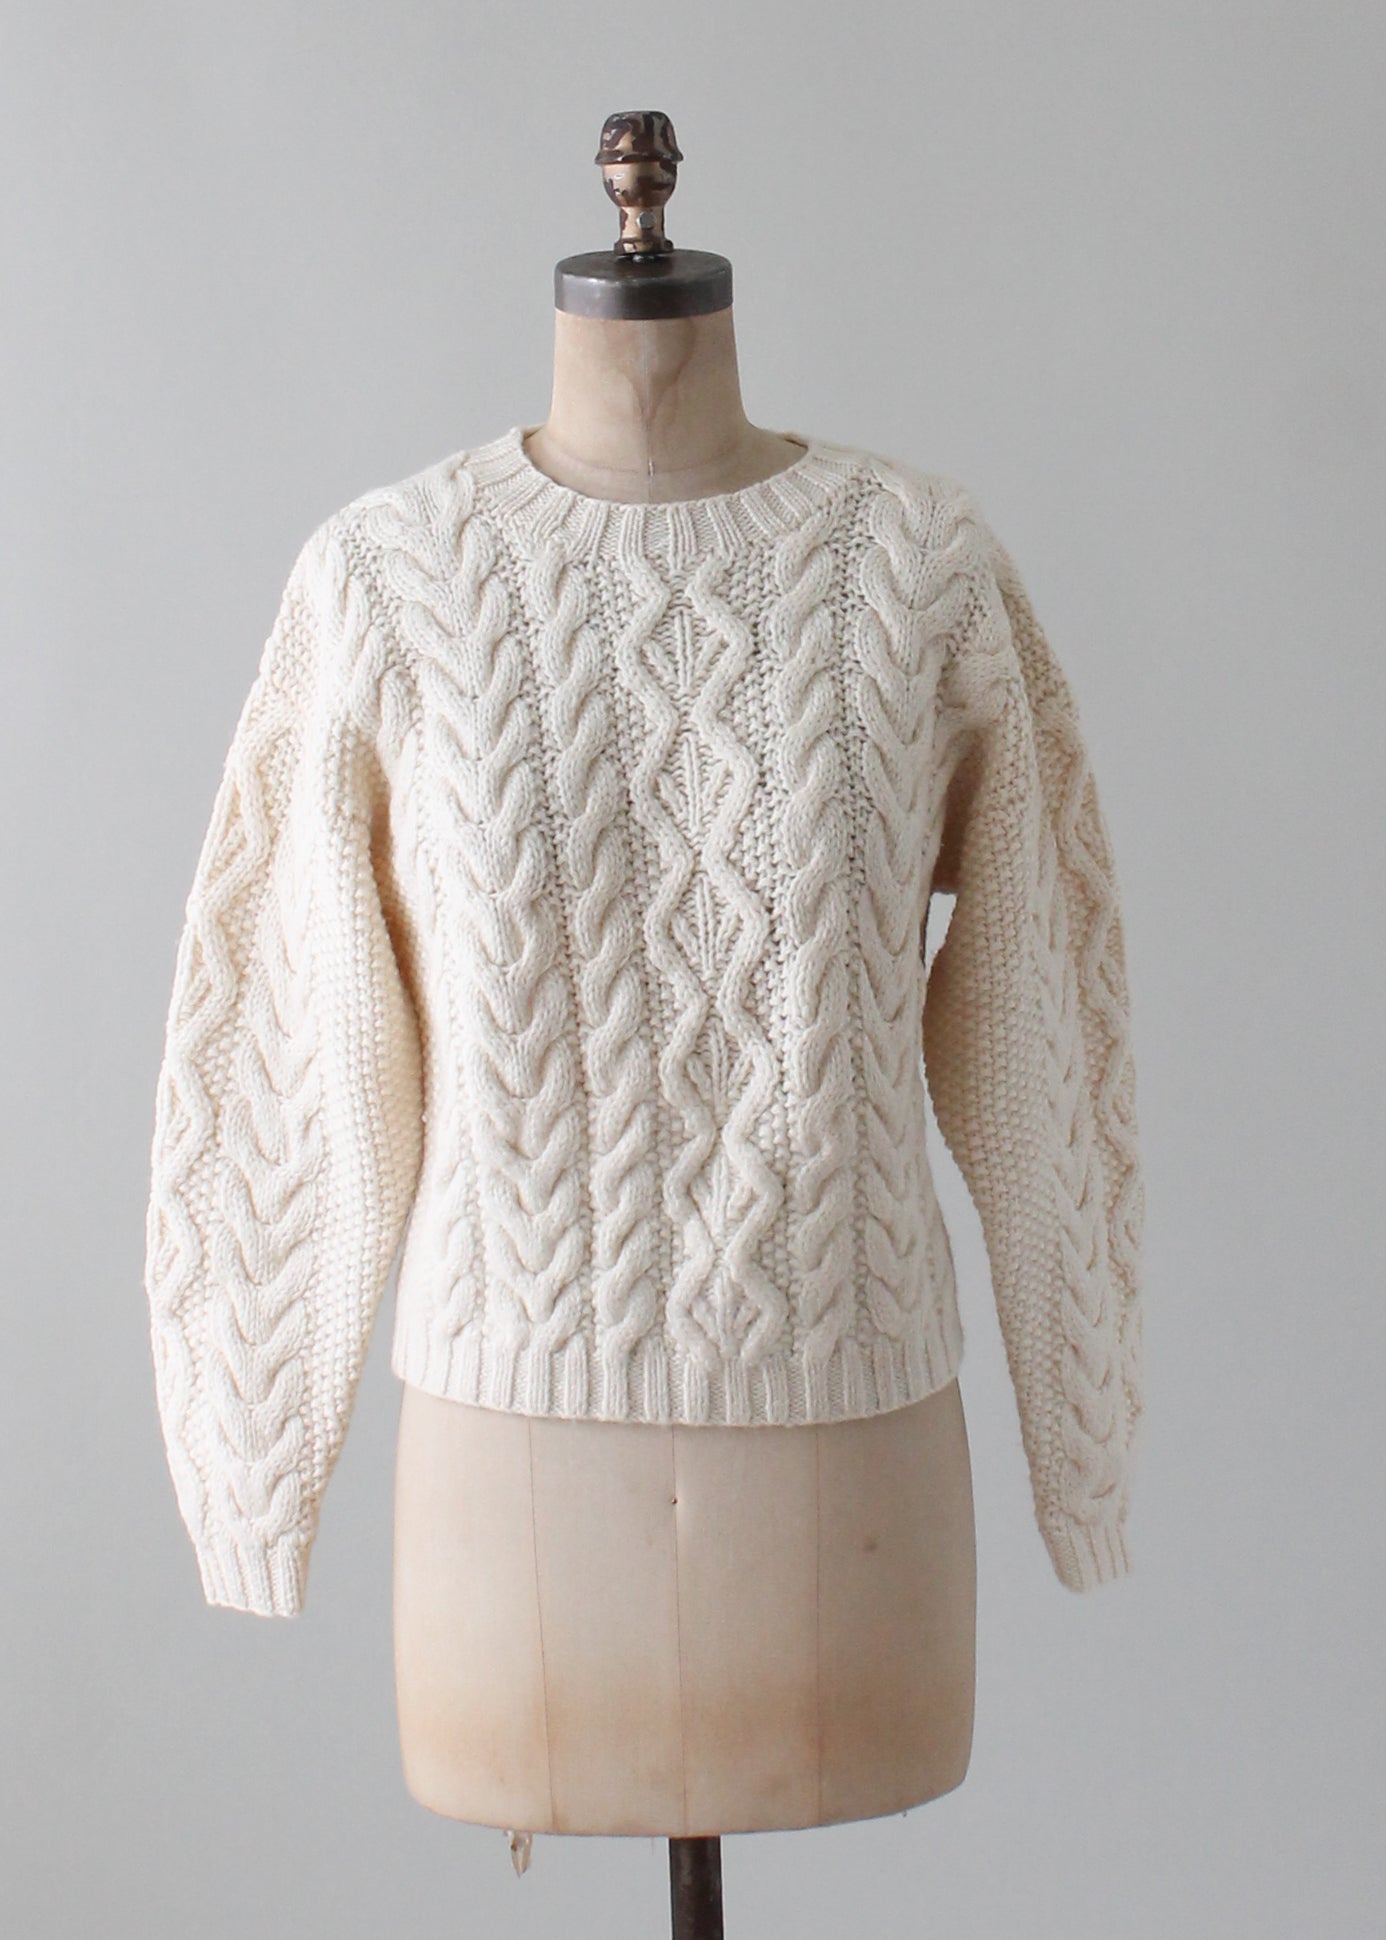 Vintage 1970s Fisherman Cable Knit Sweater - Raleigh Vintage